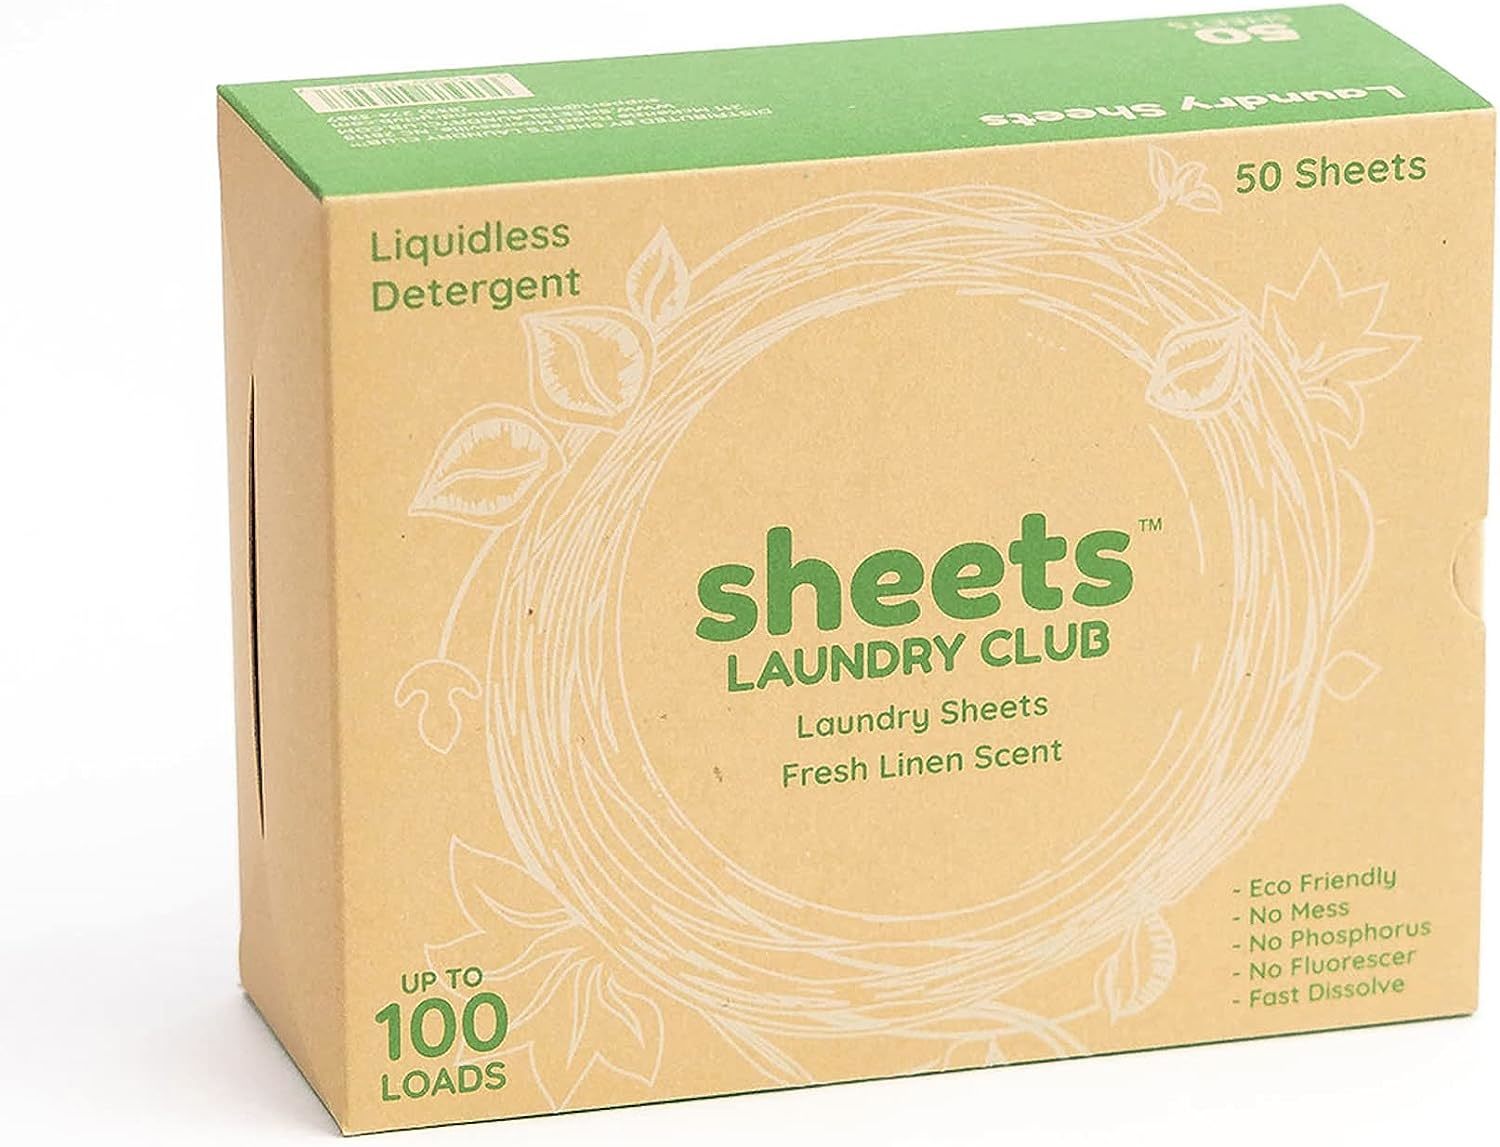 Sheets Laundry Club - As Seen on Shark Tank - Laundry Detergent - $33.99 - $109.99